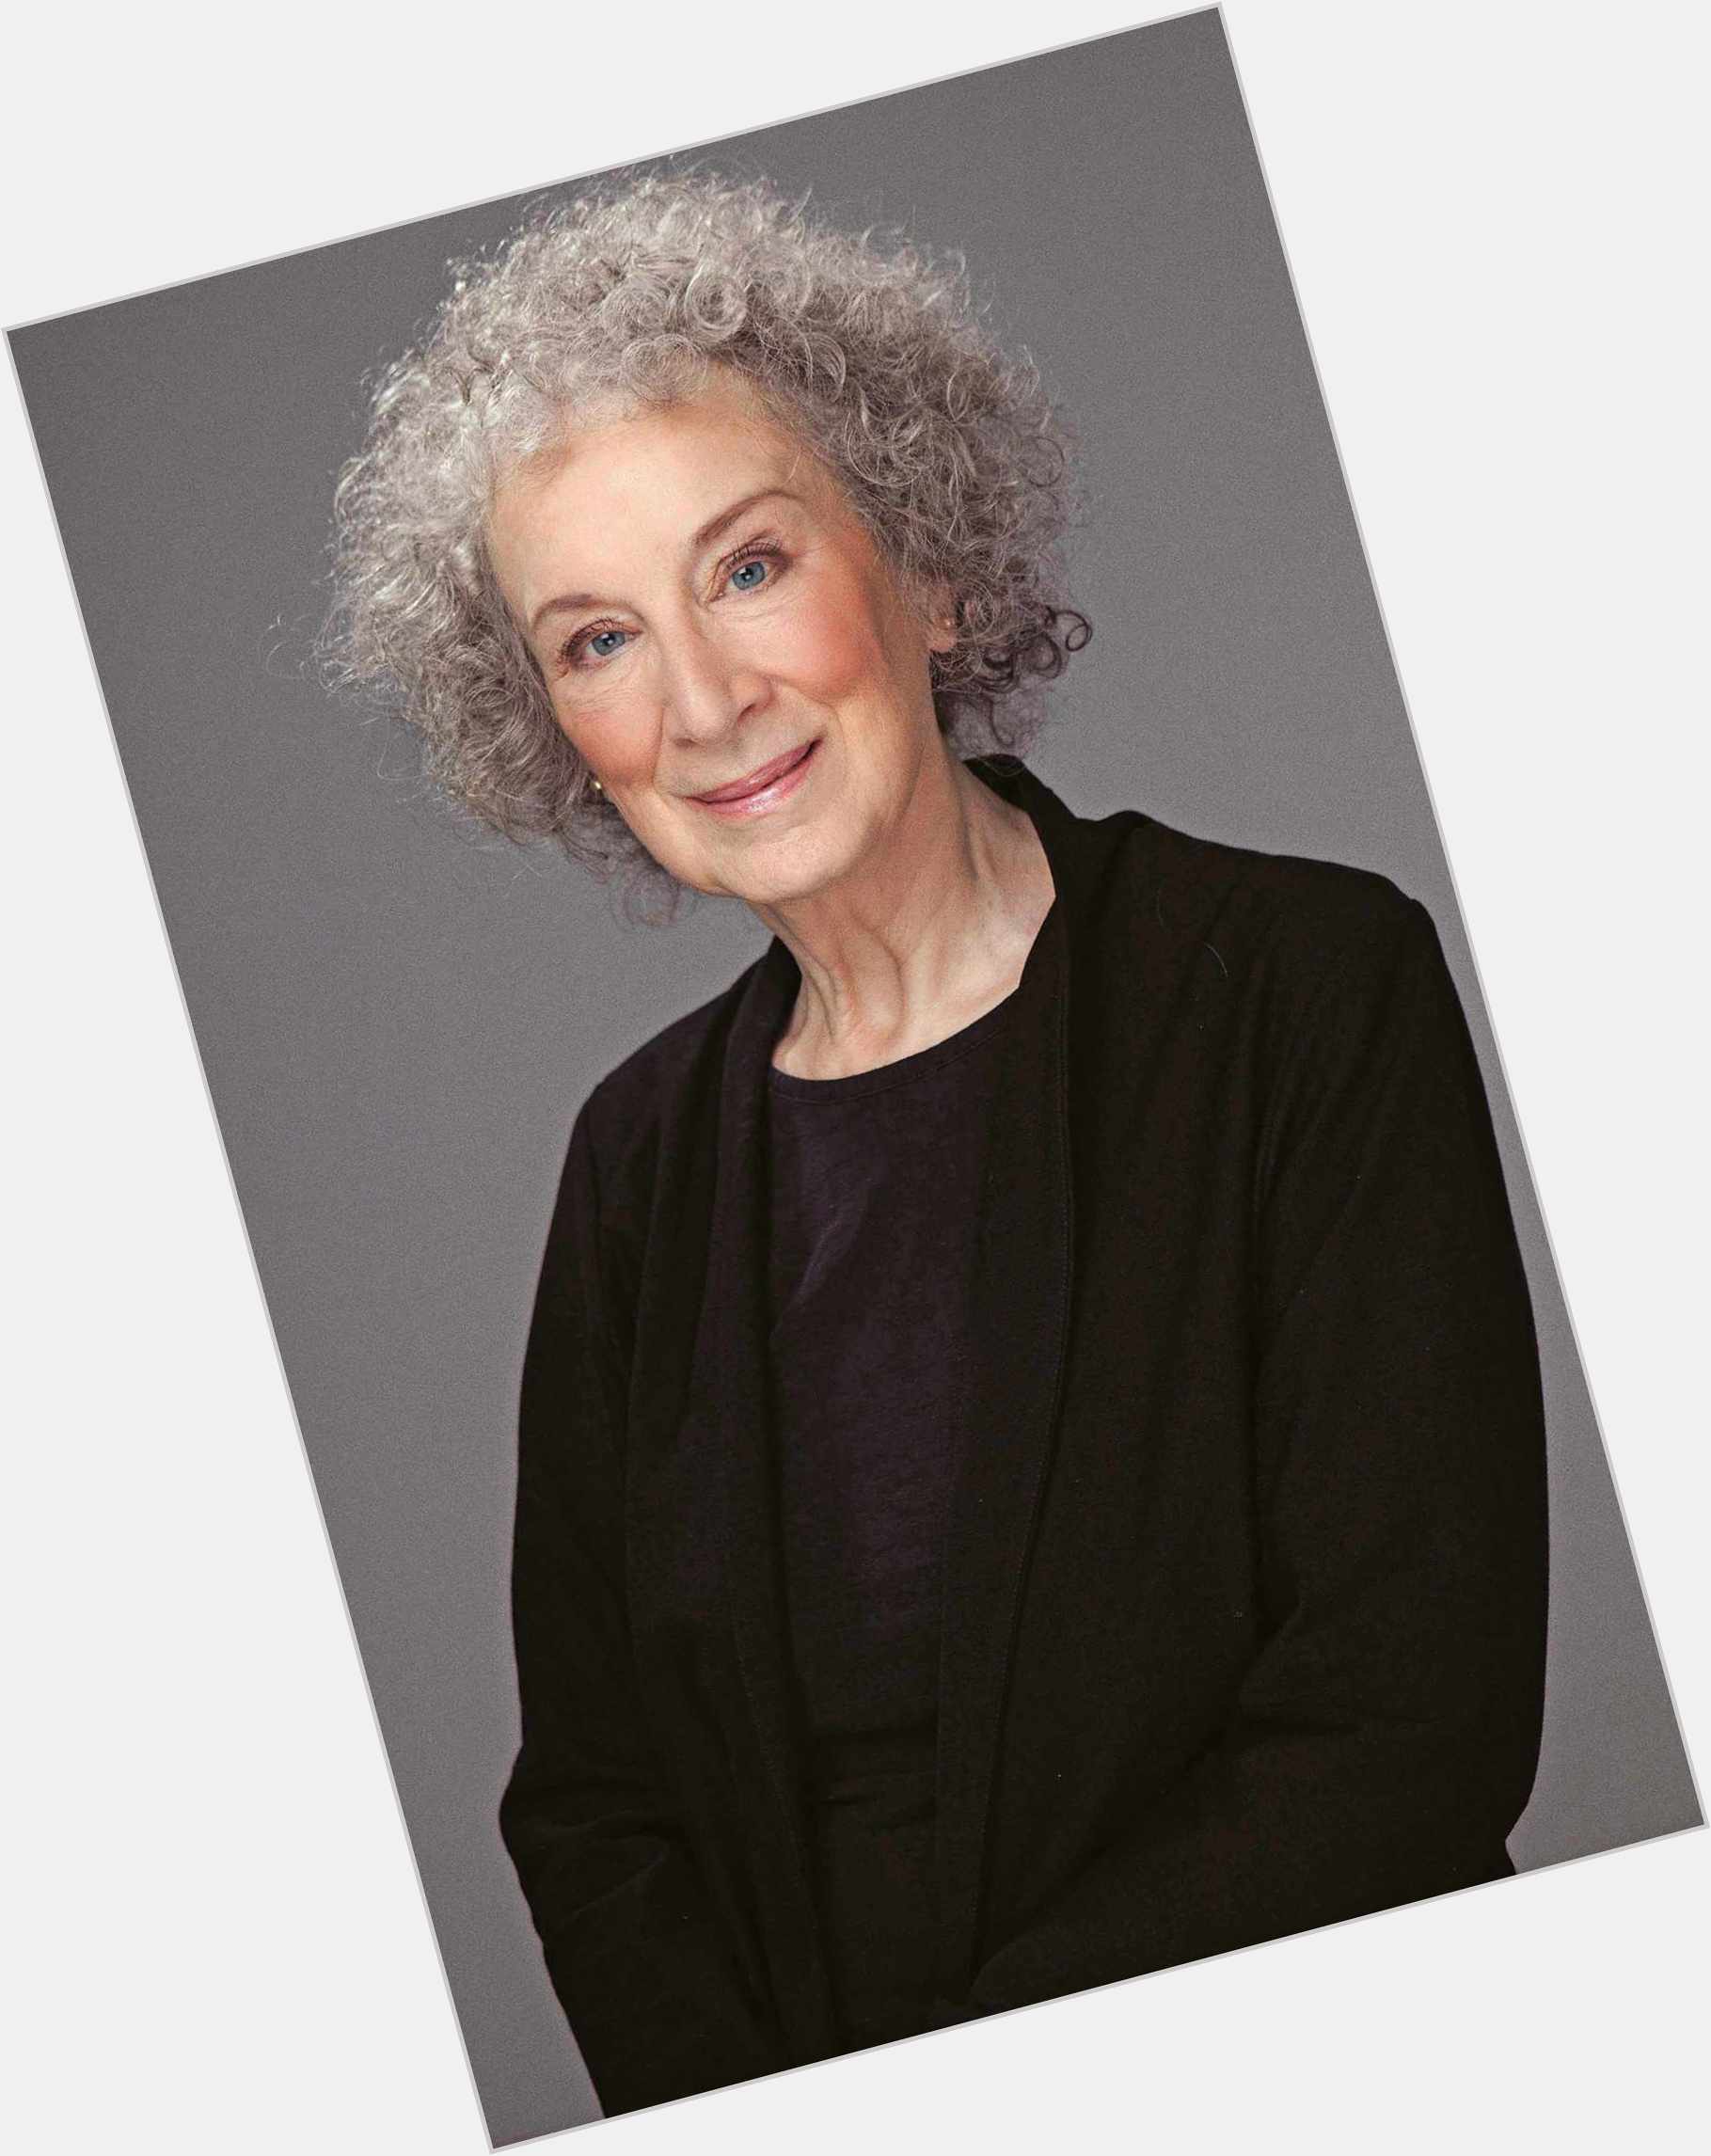 Https://fanpagepress.net/m/M/Margaret Atwood Where Who 5